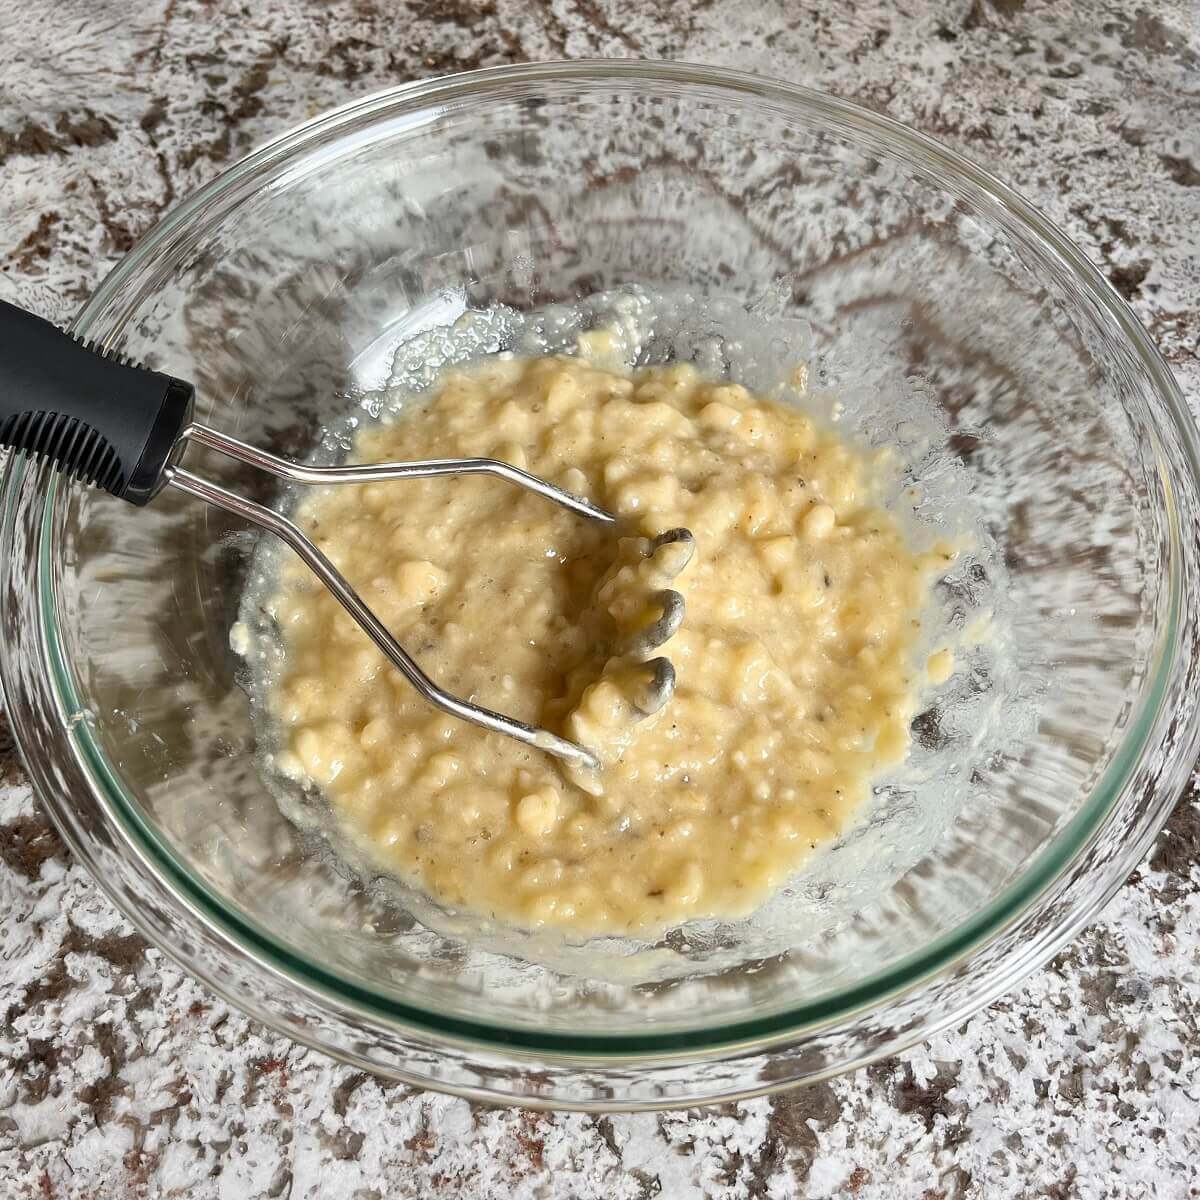 Mashed bananas in a glass bowl with a potato masher.